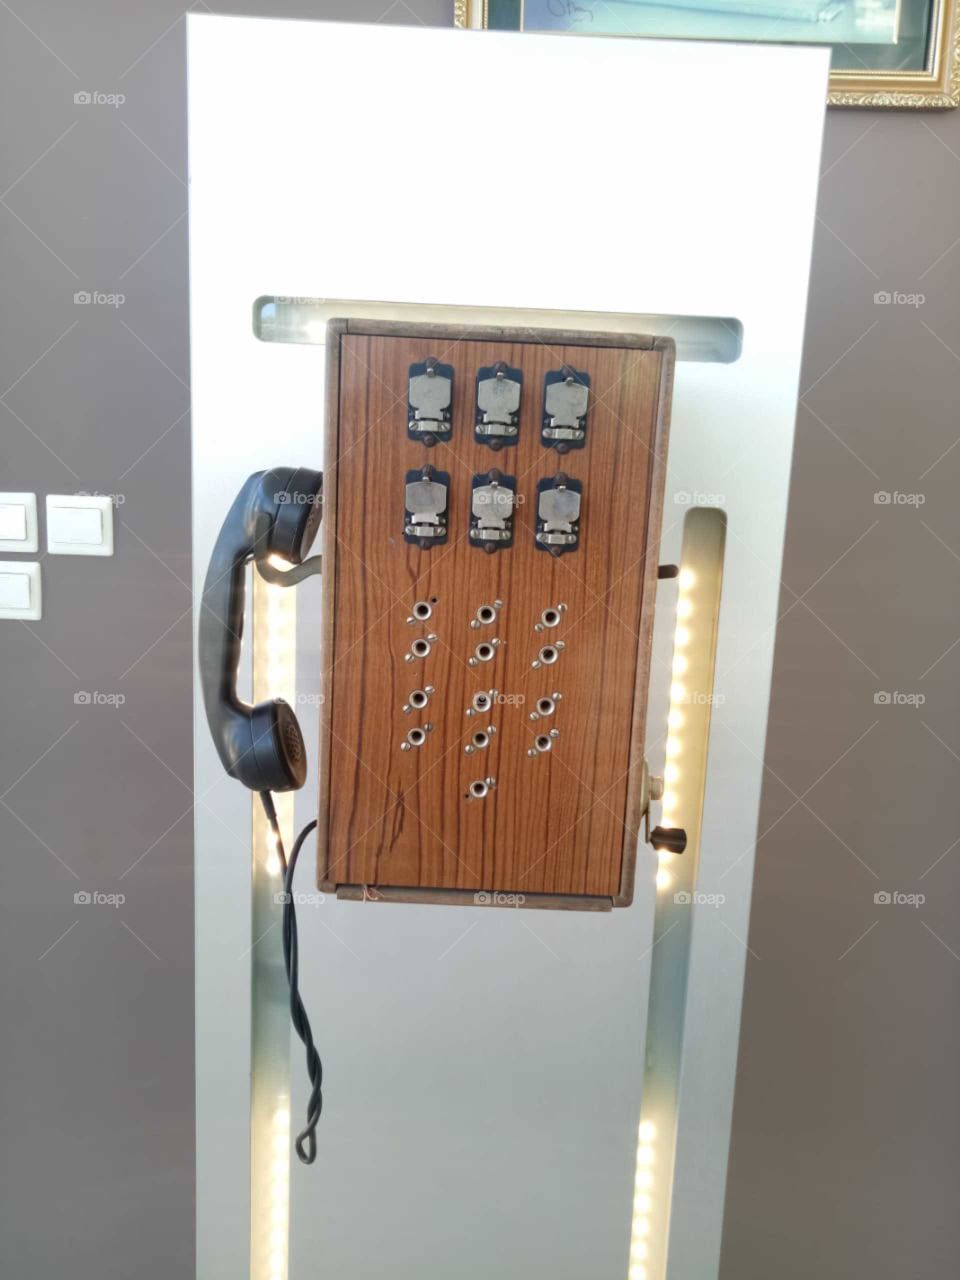 Old Phone Year 1970